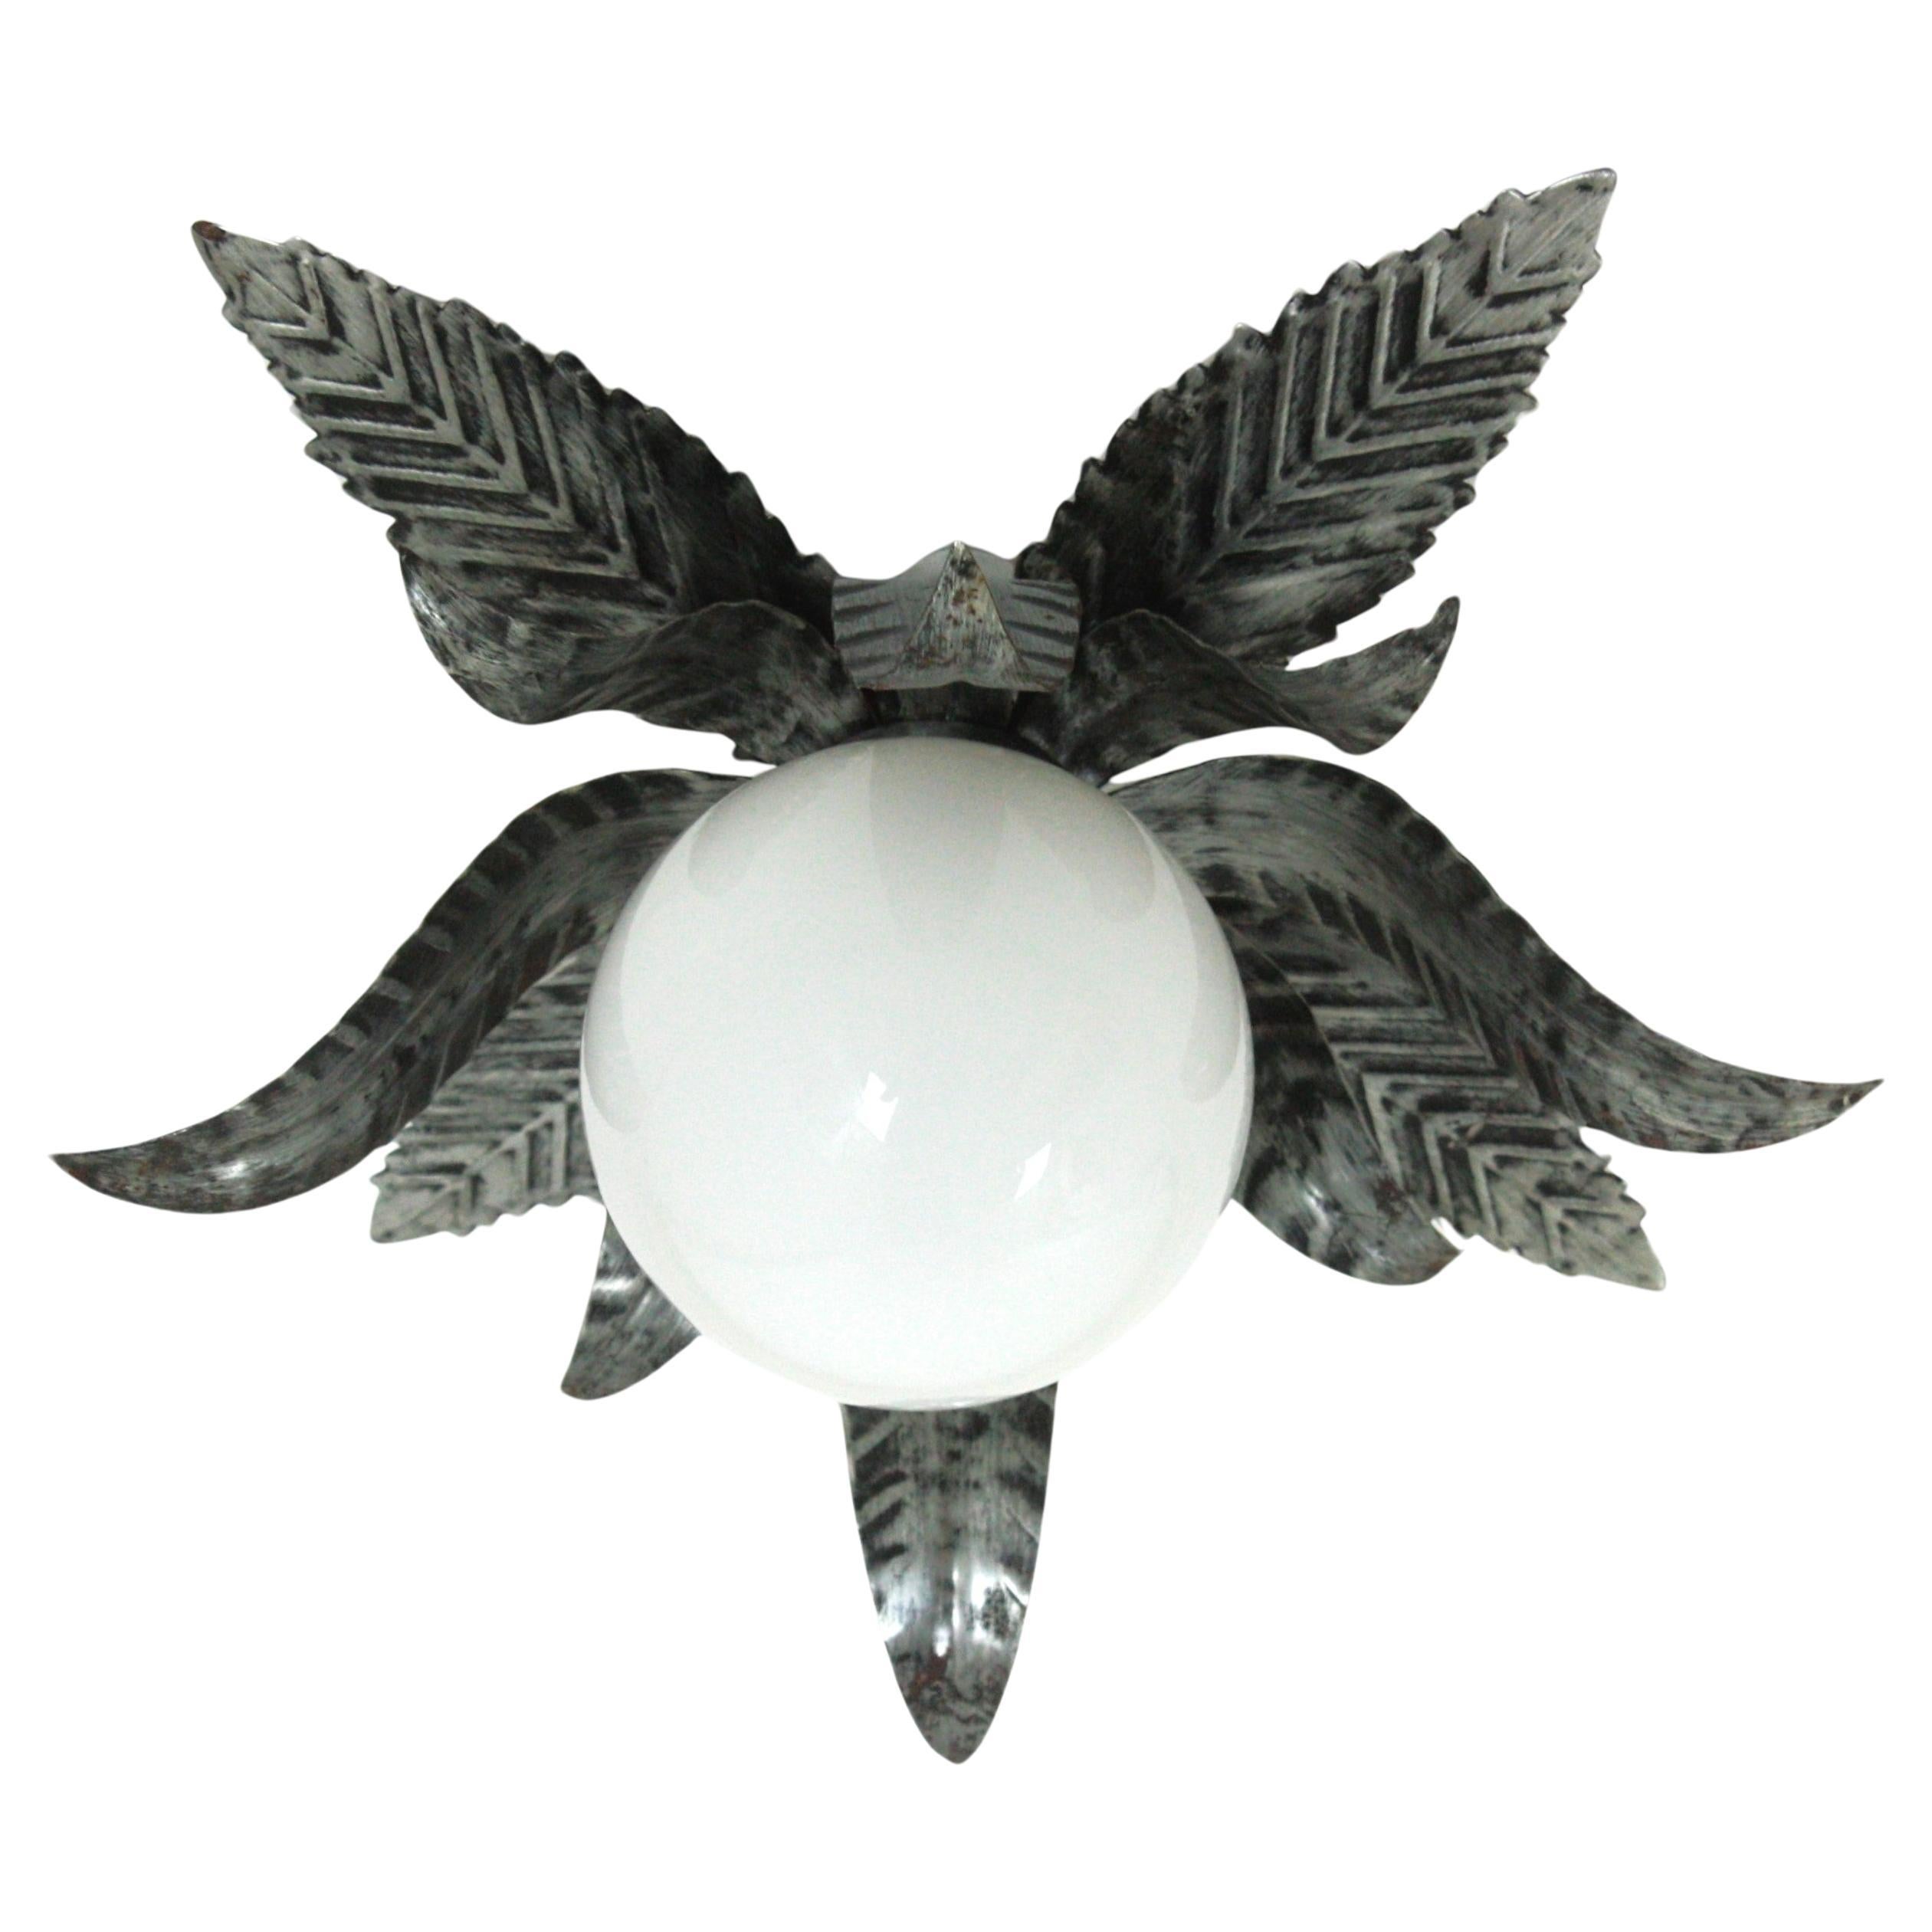 Leafed Flush Mount or Wall Sconce in Silvered Iron with Glass Globe
Midcentury flower or sunburst ceiling lamp, silver gilt metal, milk glass. Spain, 1950s-1960s.
This flush mount features a flower burst or sunburst with double layer of leaves